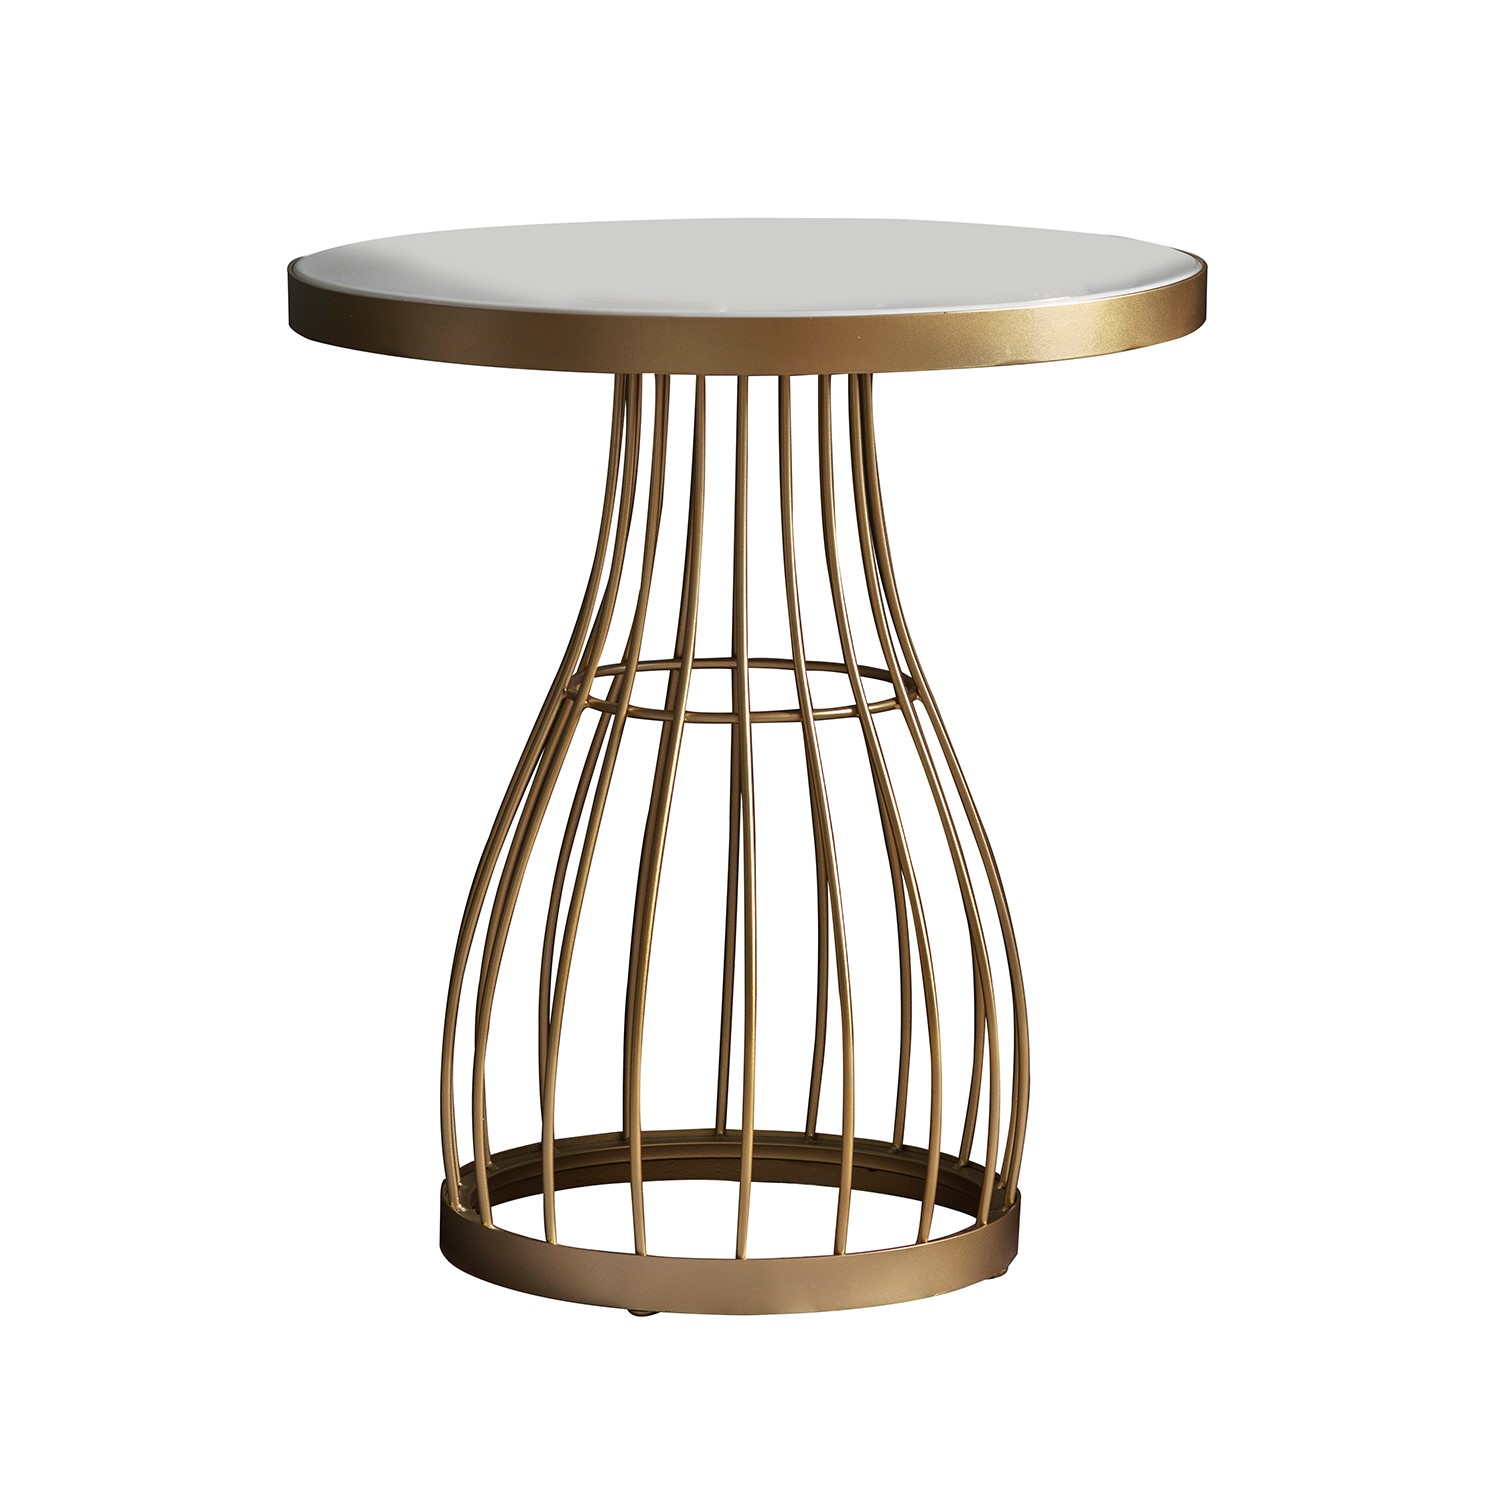 Read more about Gold side table with white marble top caspian house